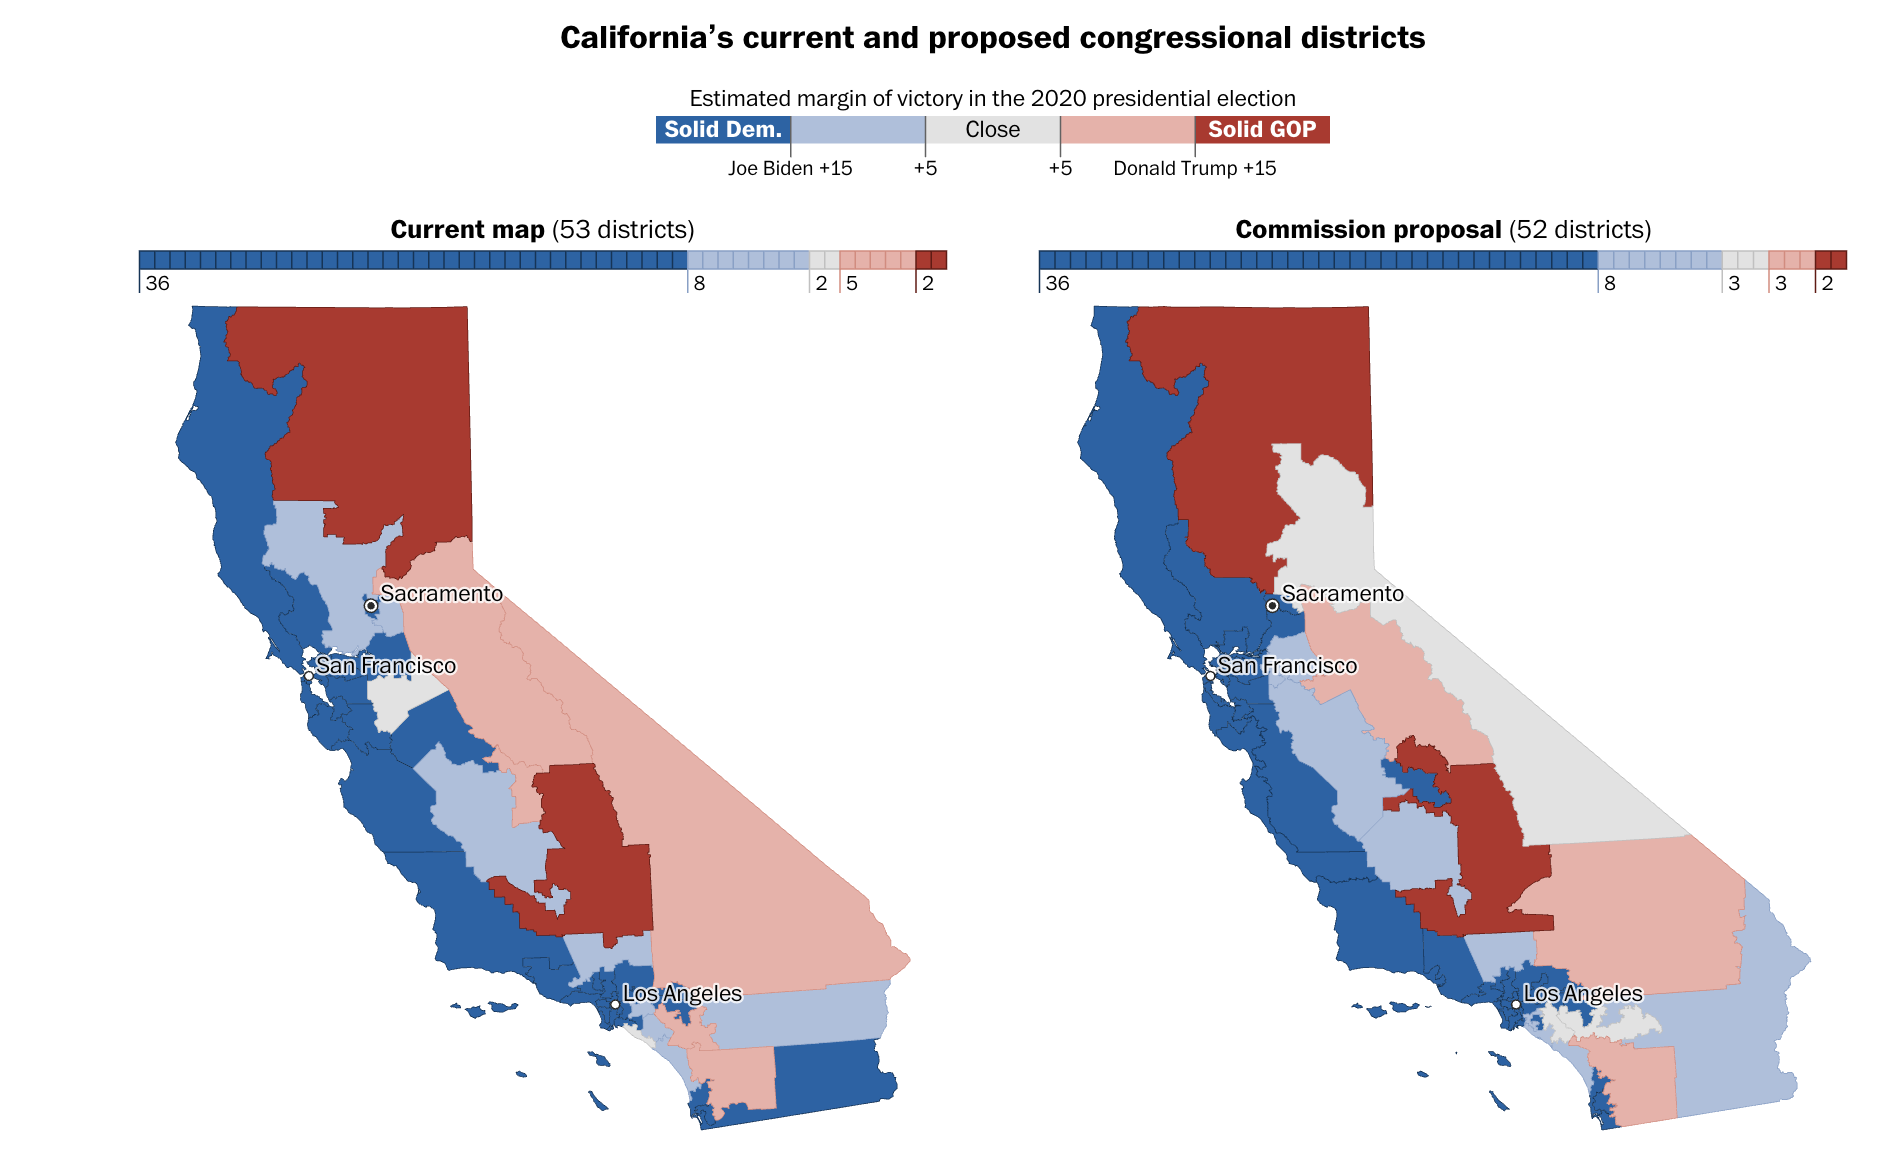 "Latinos and Democrats benefit from new California congressional map